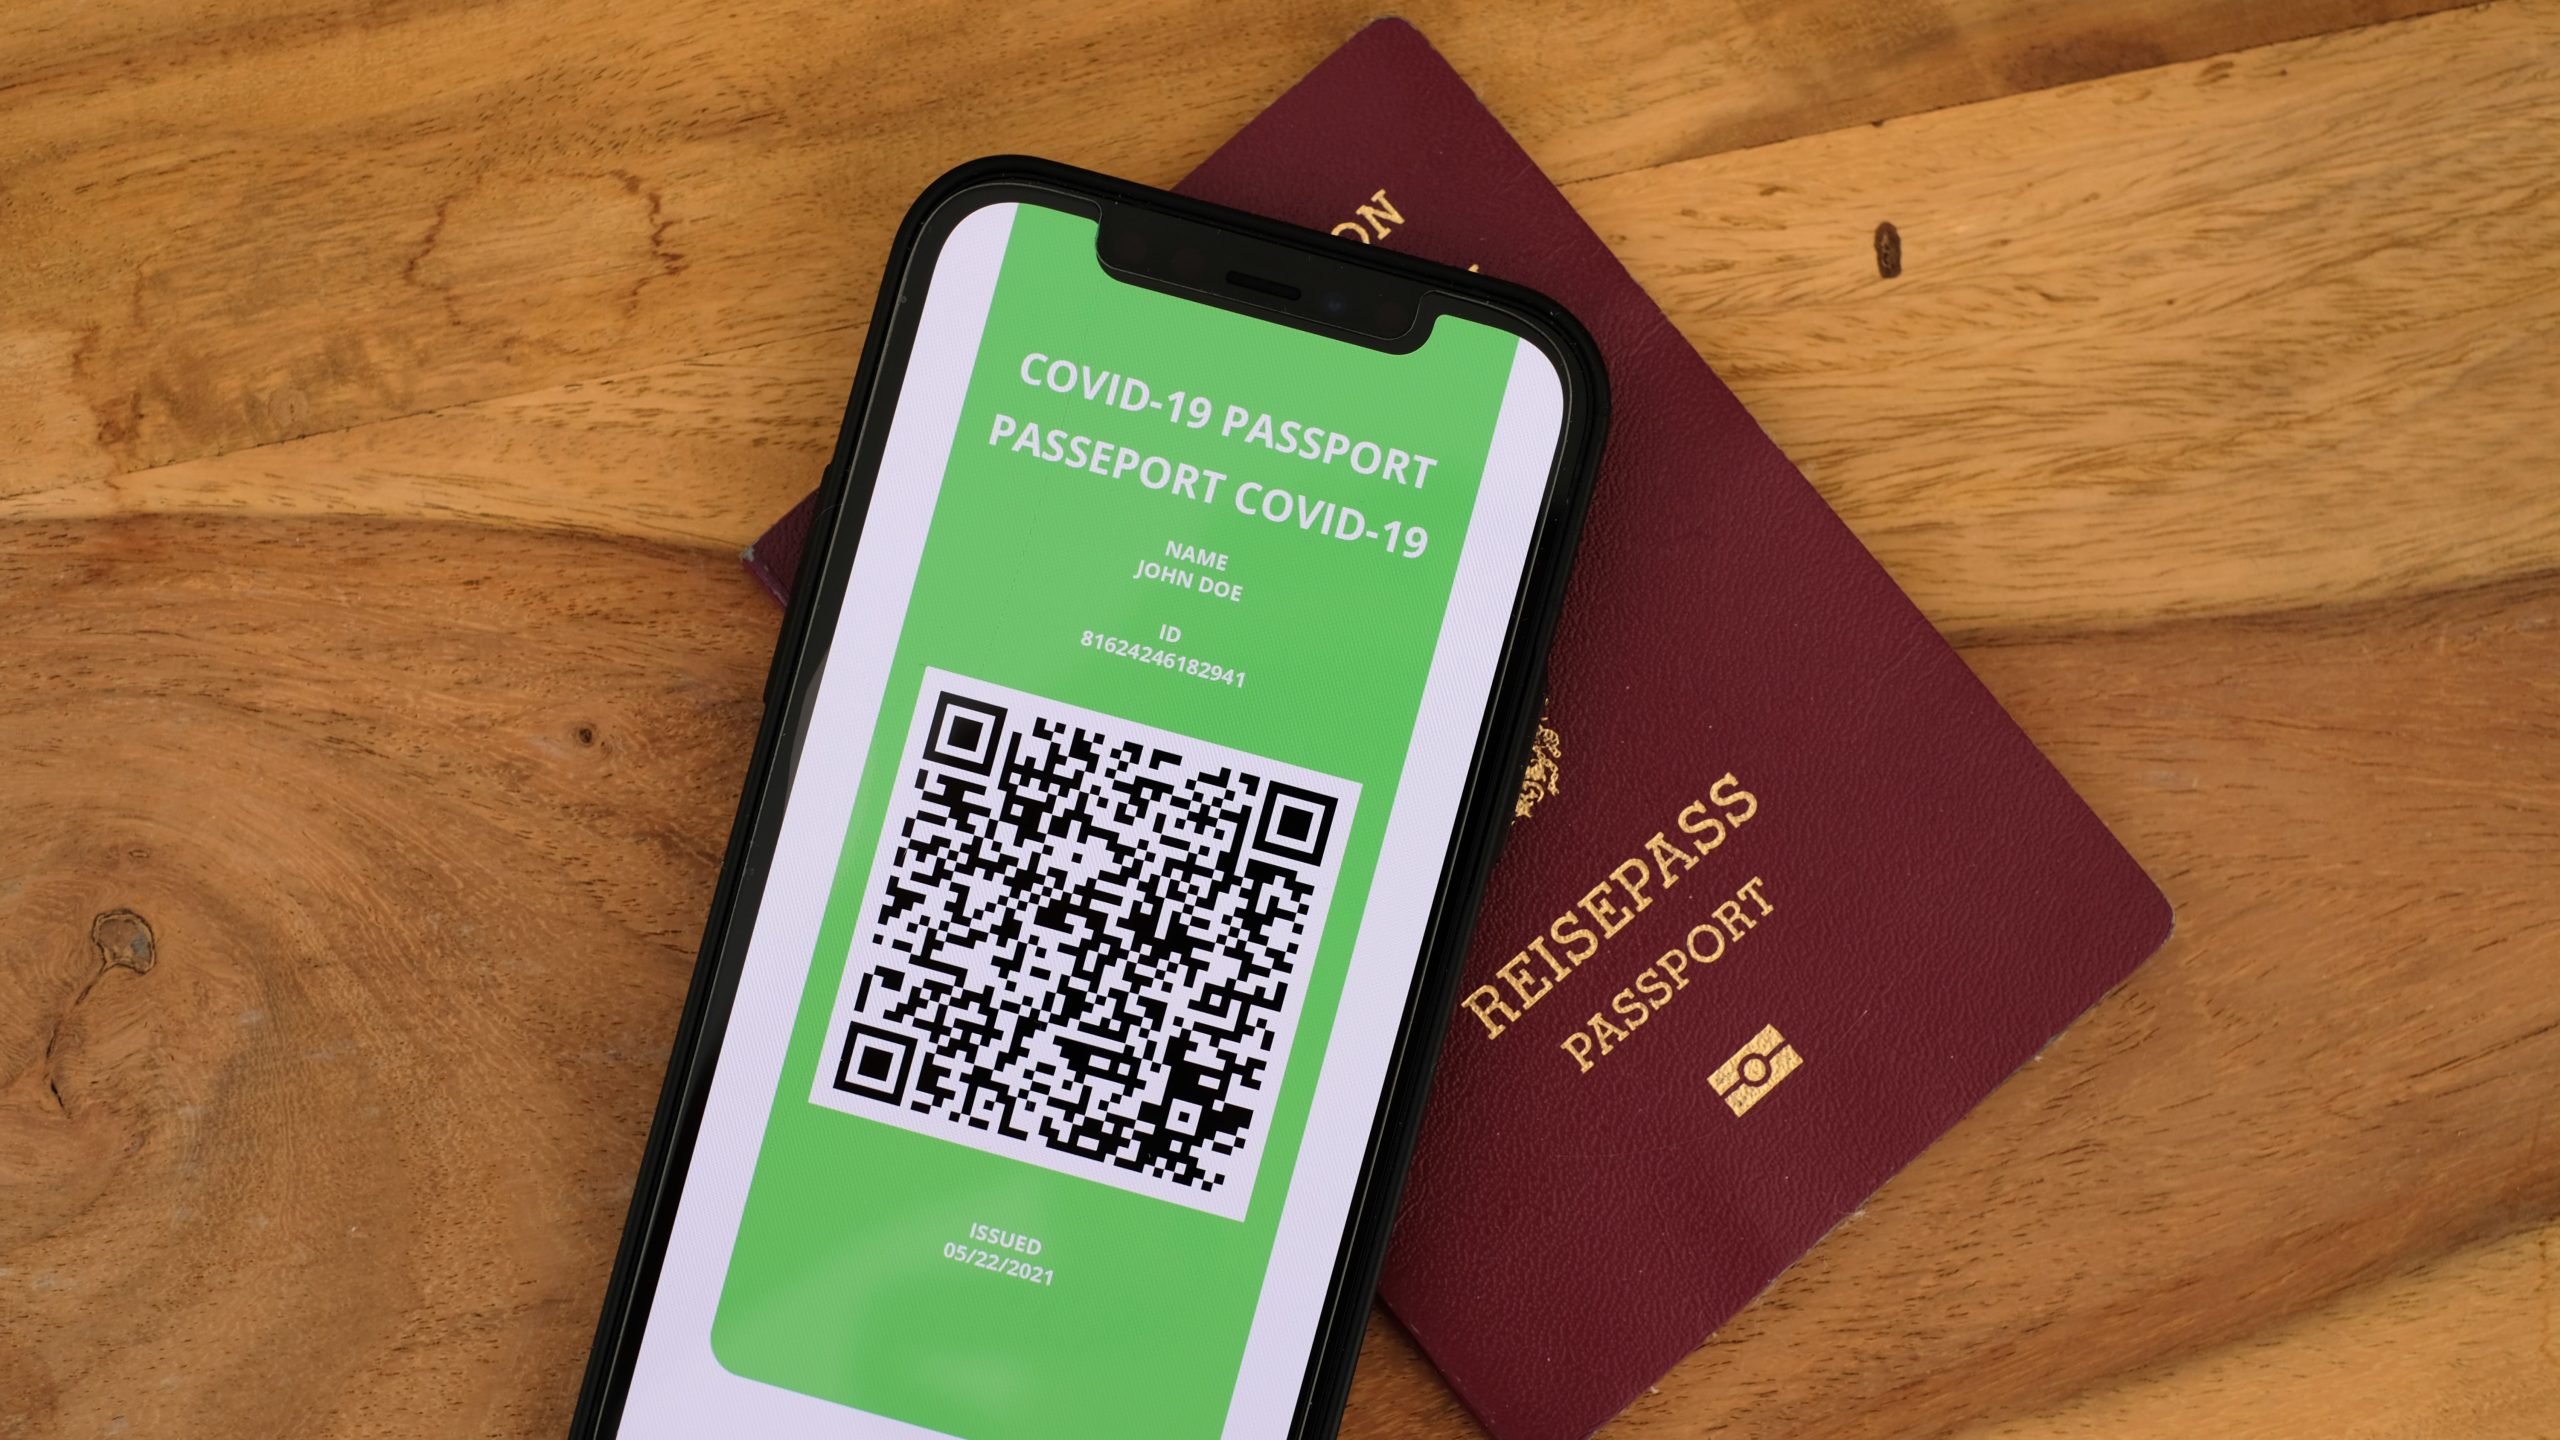 How to get the Green Pass for Travel to Italy and in EU